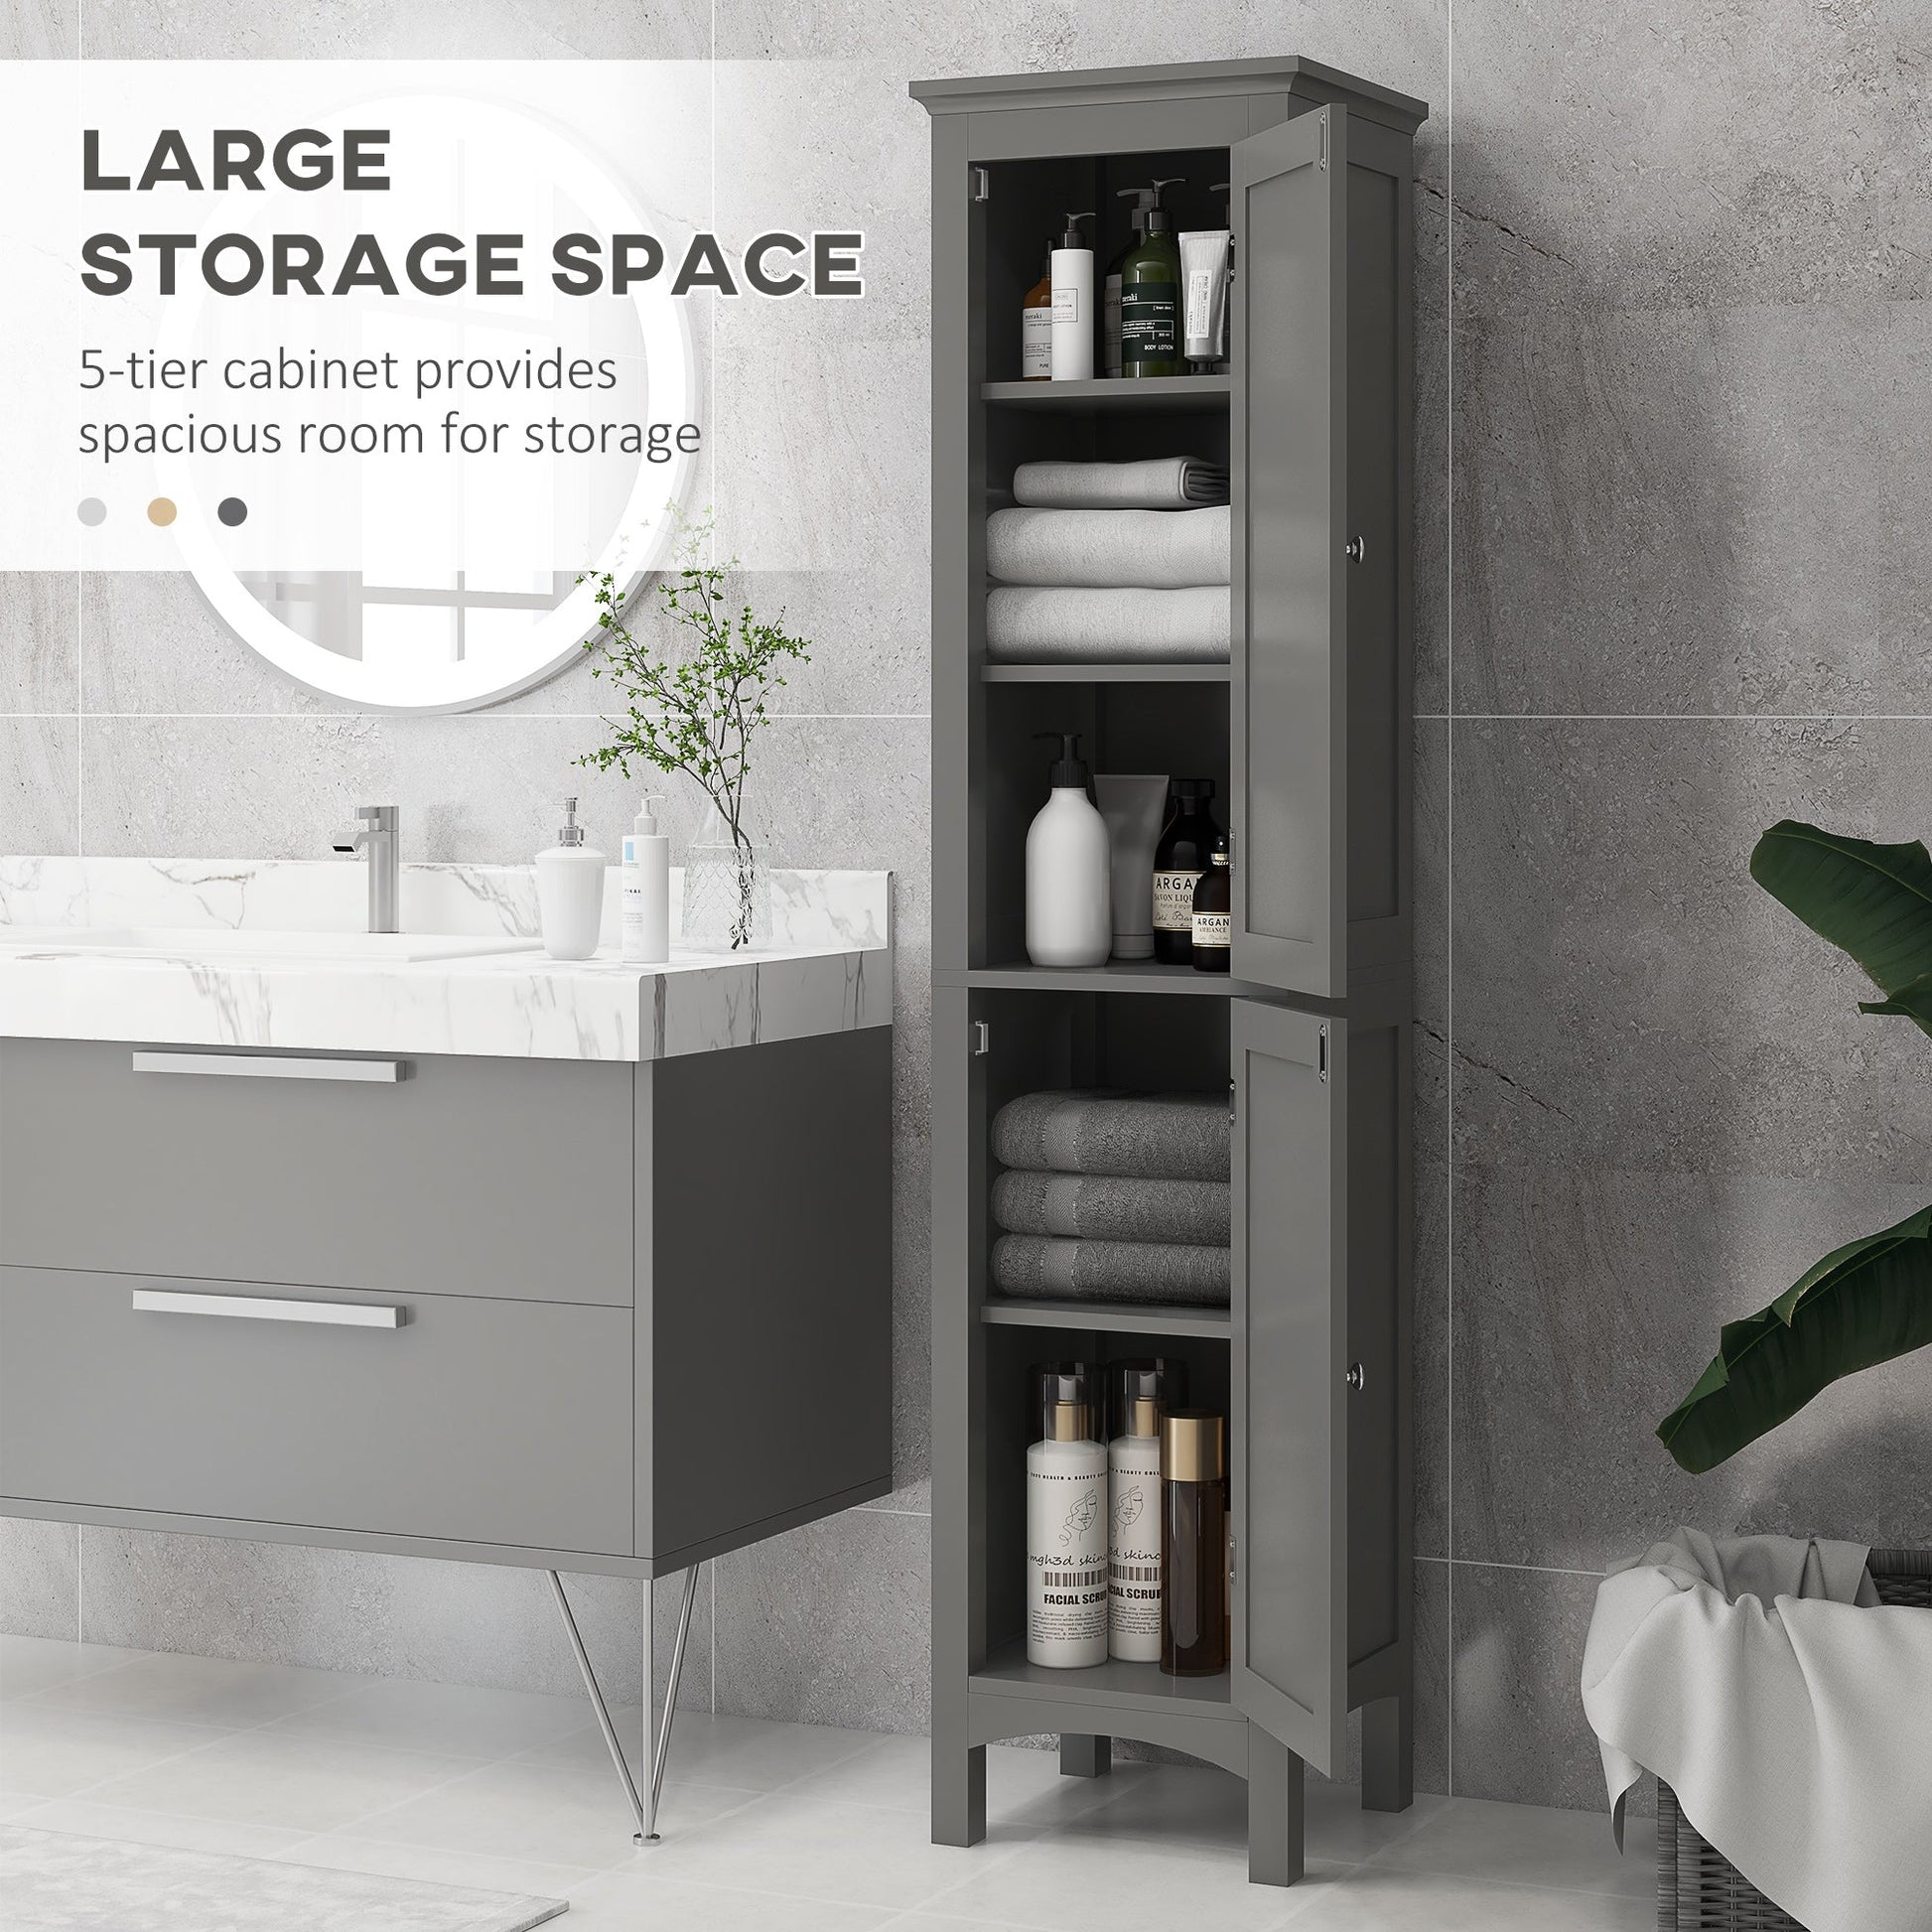 Tall Bathroom Cabinet, Freestanding Storage Organizer with Adjustable Shelves and Cupboards, 15" x 13" x 63", Grey Bathroom Cabinets   at Gallery Canada